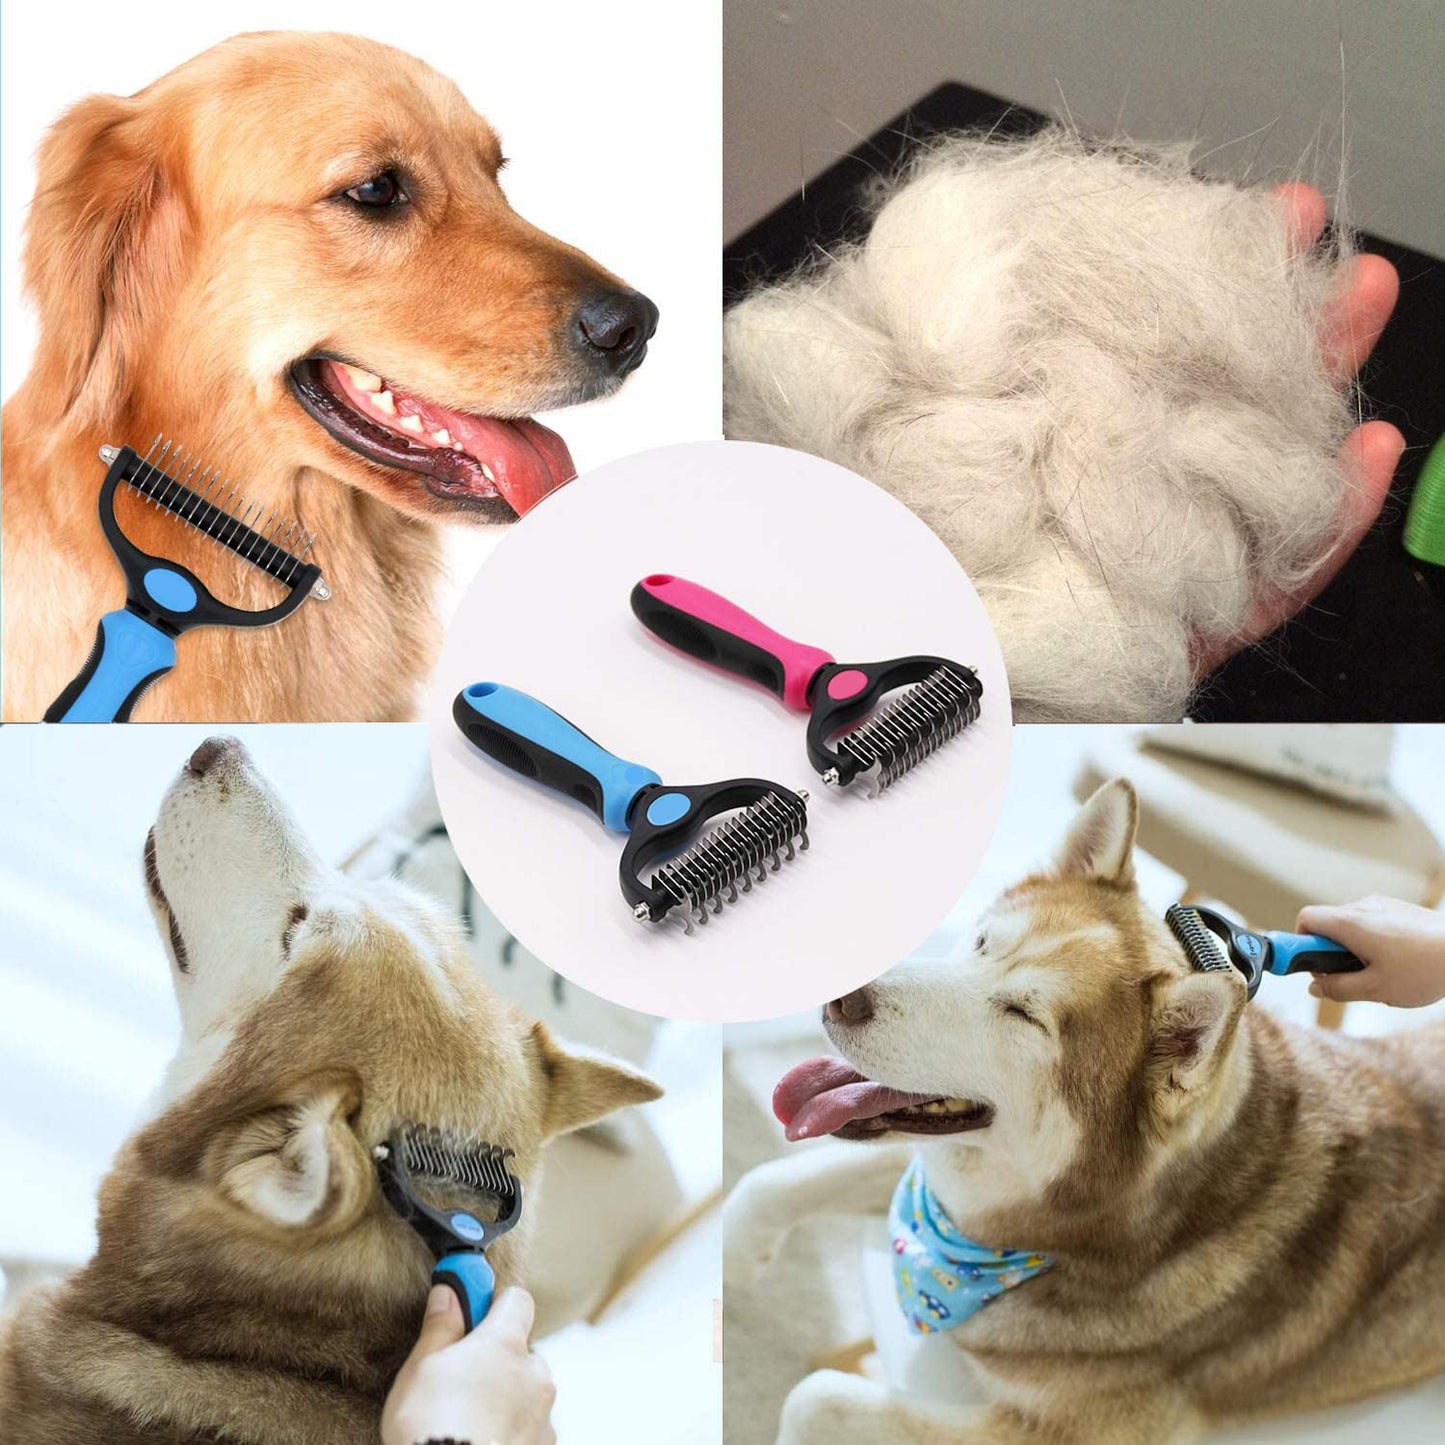 Pet Grooming Tool Dematting Comb for Dogs& Cats 2 Sided Undercoat Rake for Easy Mats &Tangles Removing Wintory